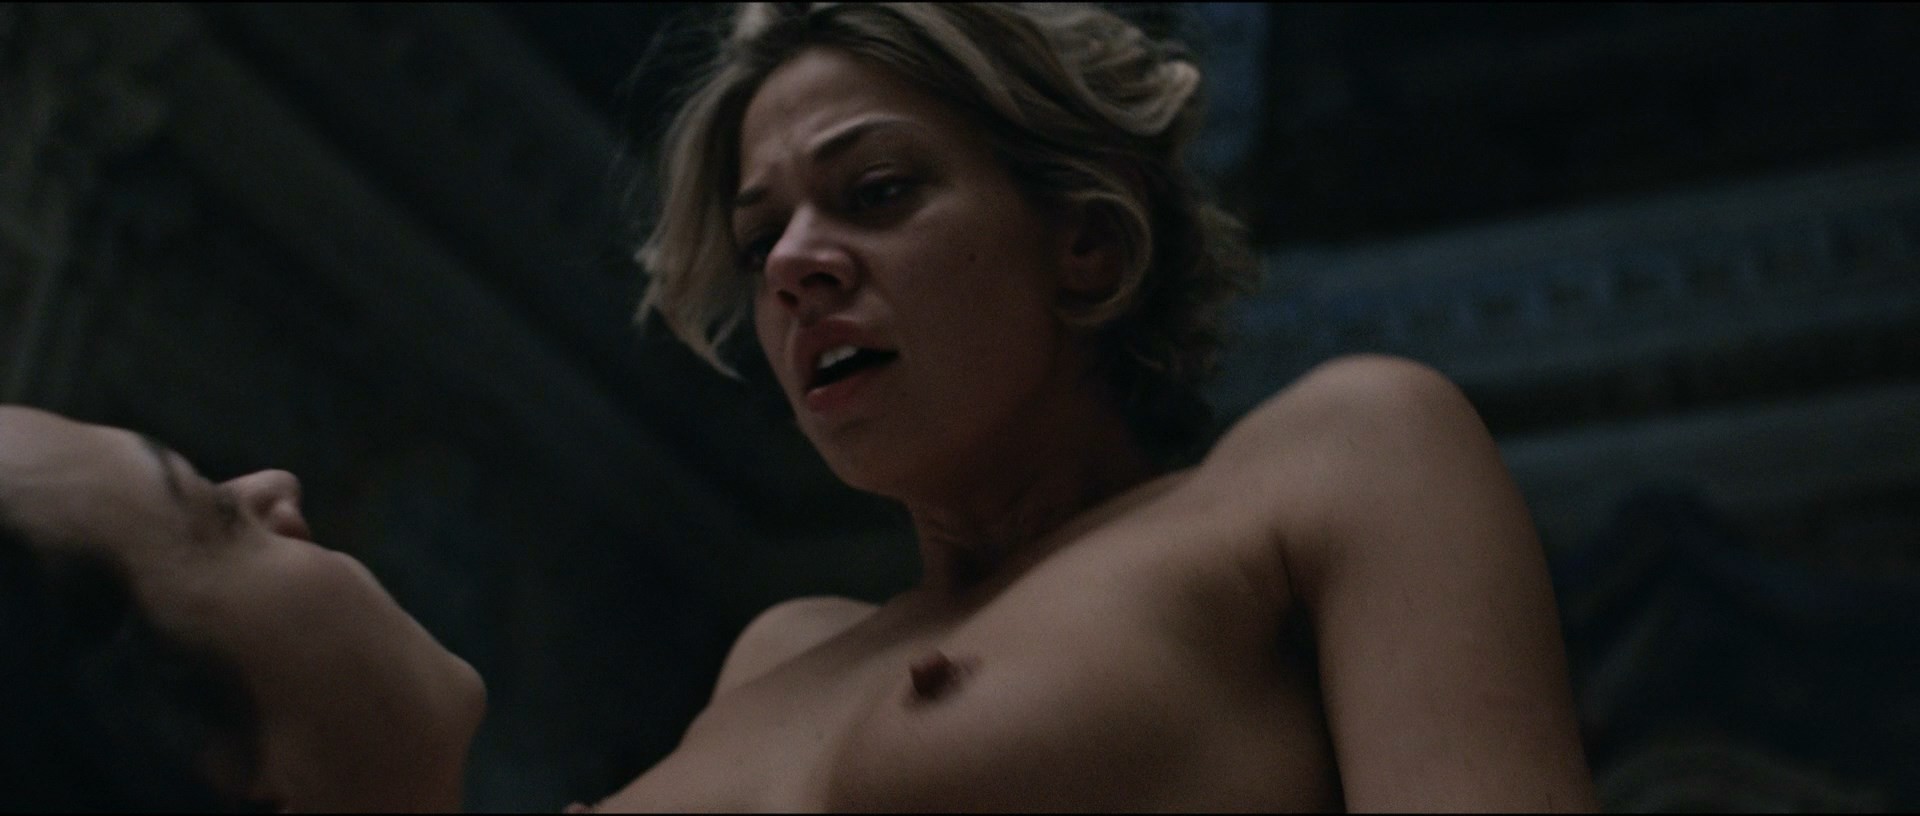 Analeigh tipton nude pictures